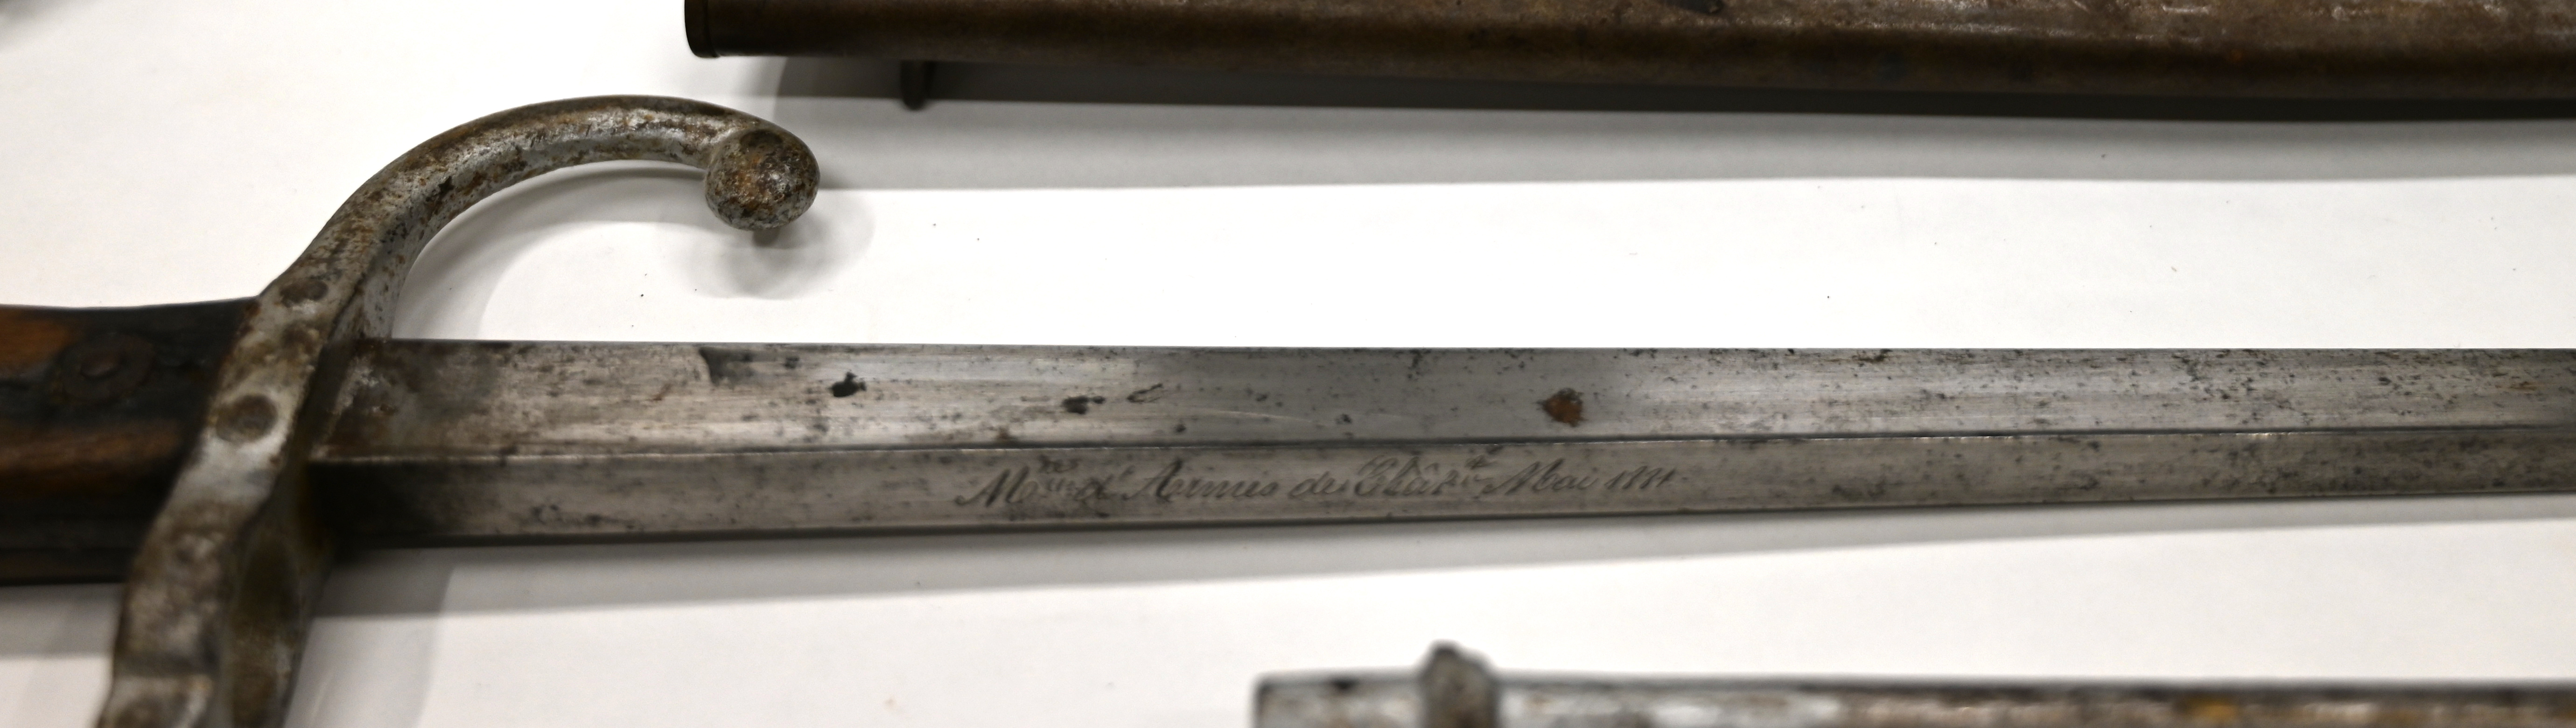 A French Chassepot bayonet with Yataghan blade and scabbard, 1869 with registration numbers to hi... - Image 7 of 8